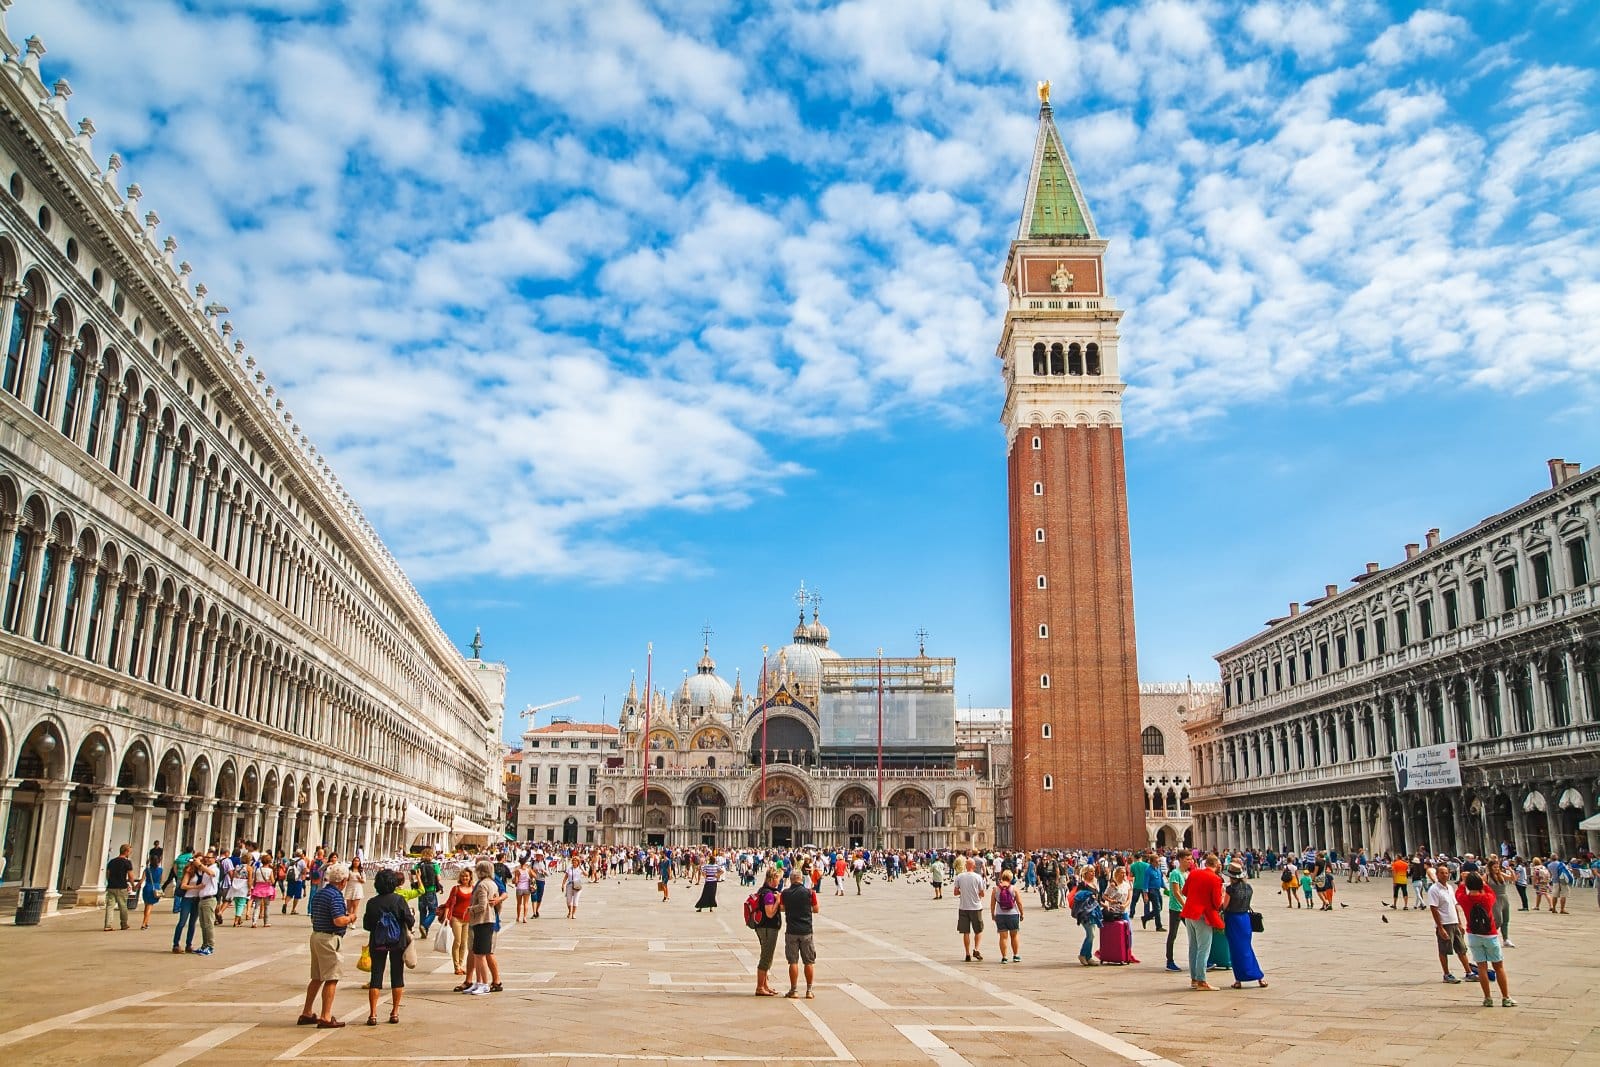 <p class="wp-caption-text">Image Credit: Shutterstock / Pani Garmyder</p>  <p>The charm of Venice and Florence is overshadowed by hordes of American tourists who often fail to respect the serene, historical ambiance. Locals feel their cities are being turned into theme parks rather than living communities.</p>